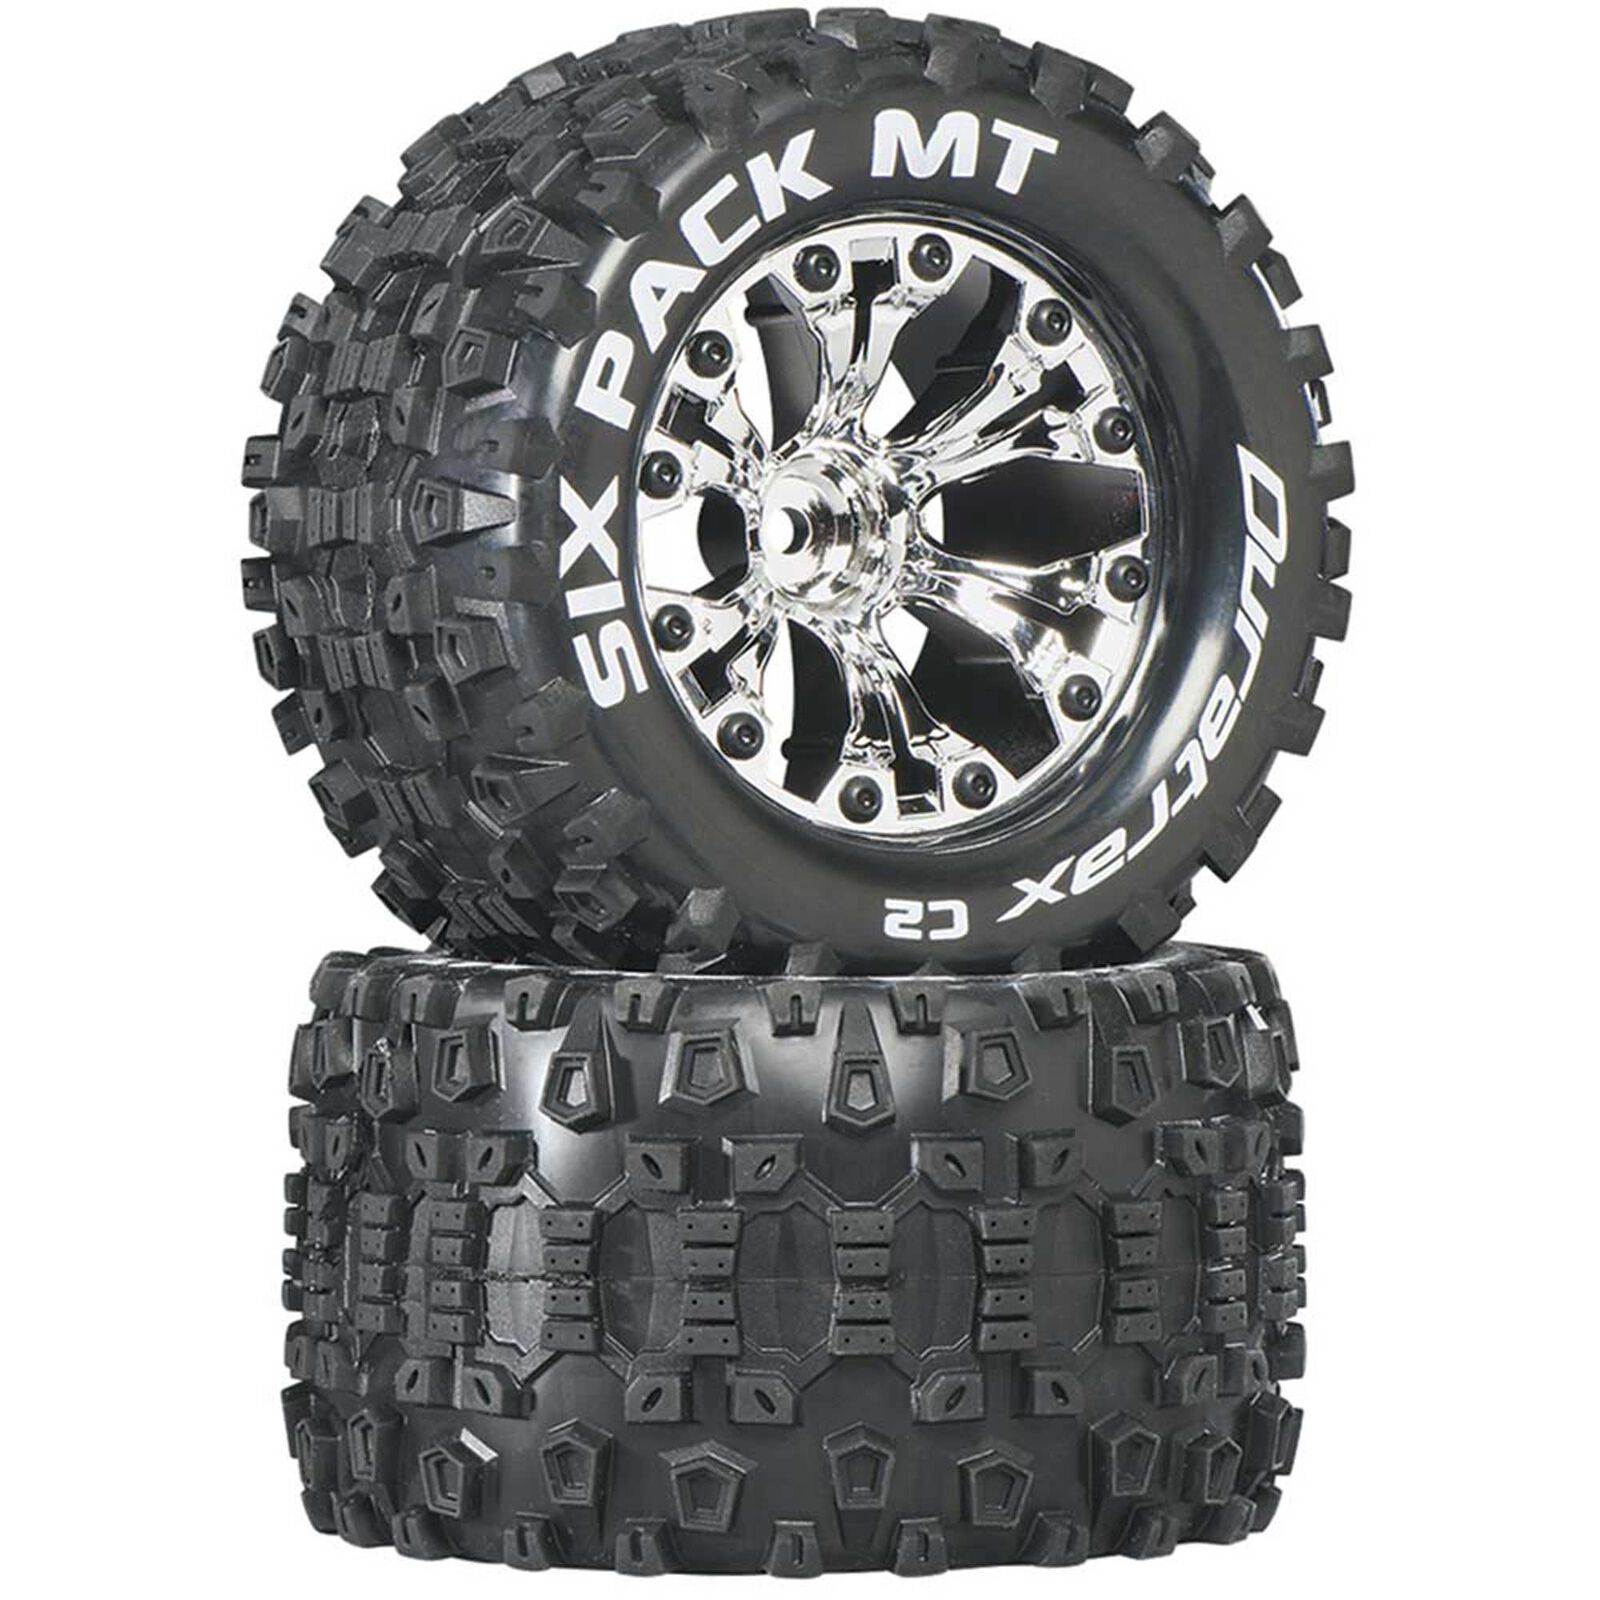 Six-Pack MT 2.8" 2WD Mounted 1/2" Offset Tires, Chrome (2)